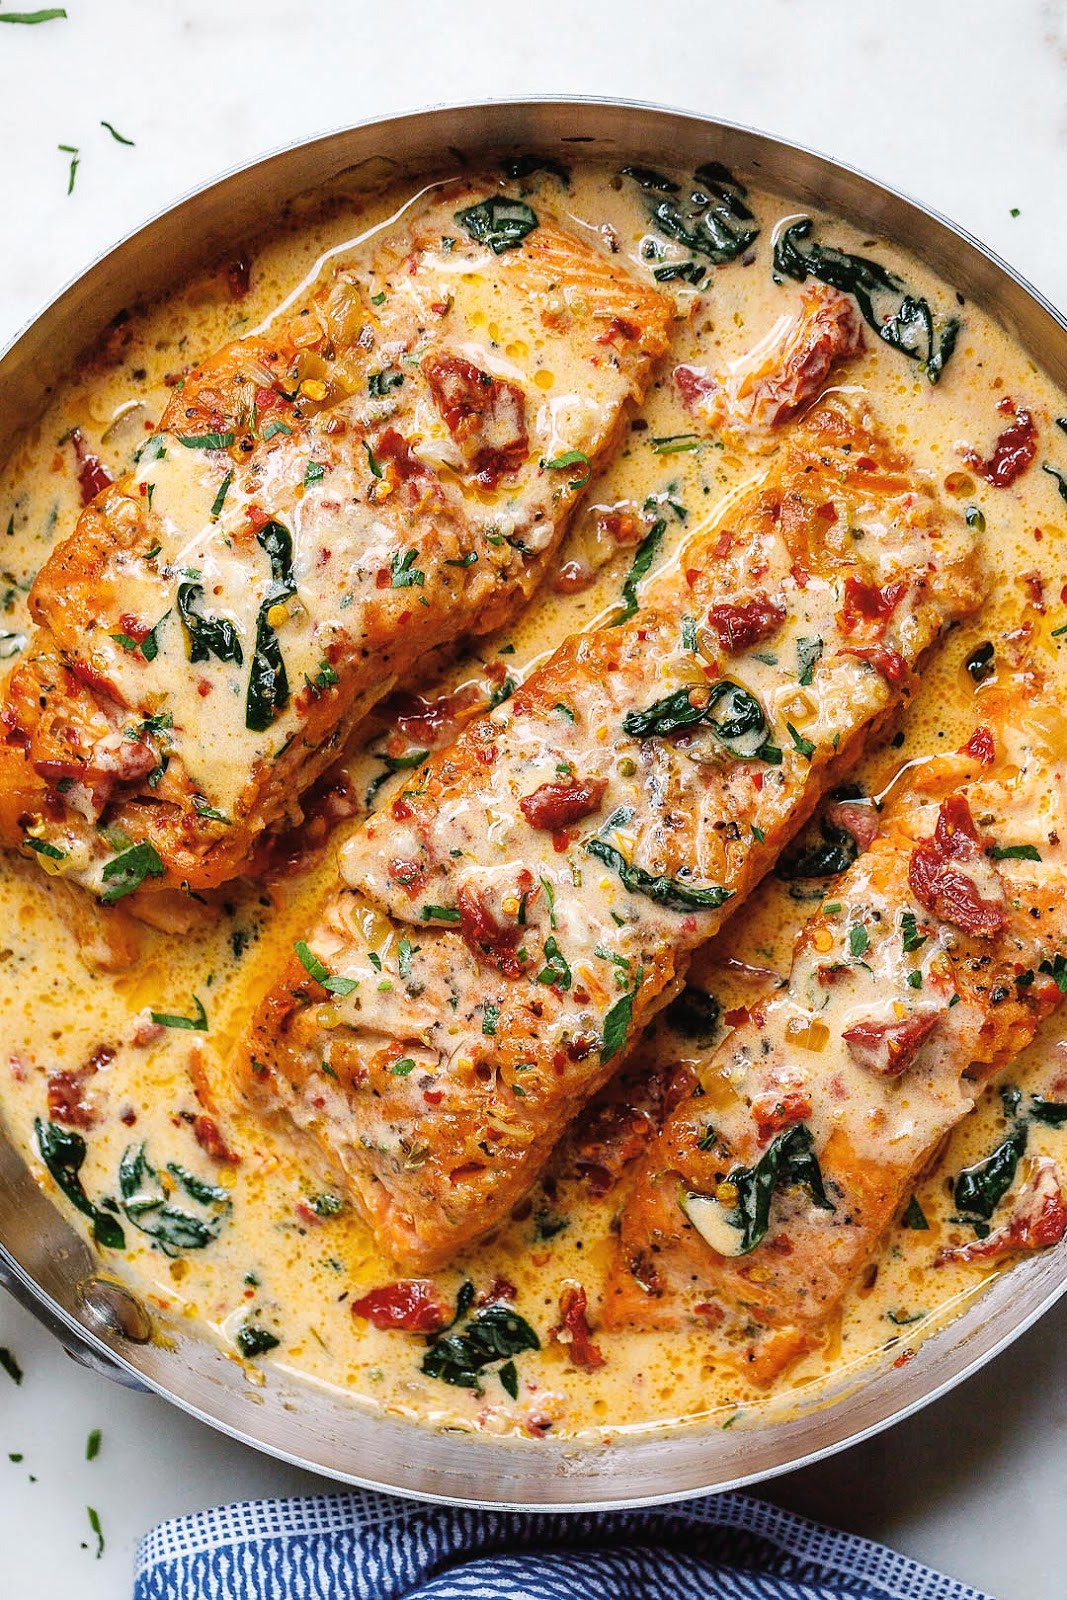 How to Make Creamy Garlic Tuscan Salmon With Spinach and Sun-Dried Tomatoes